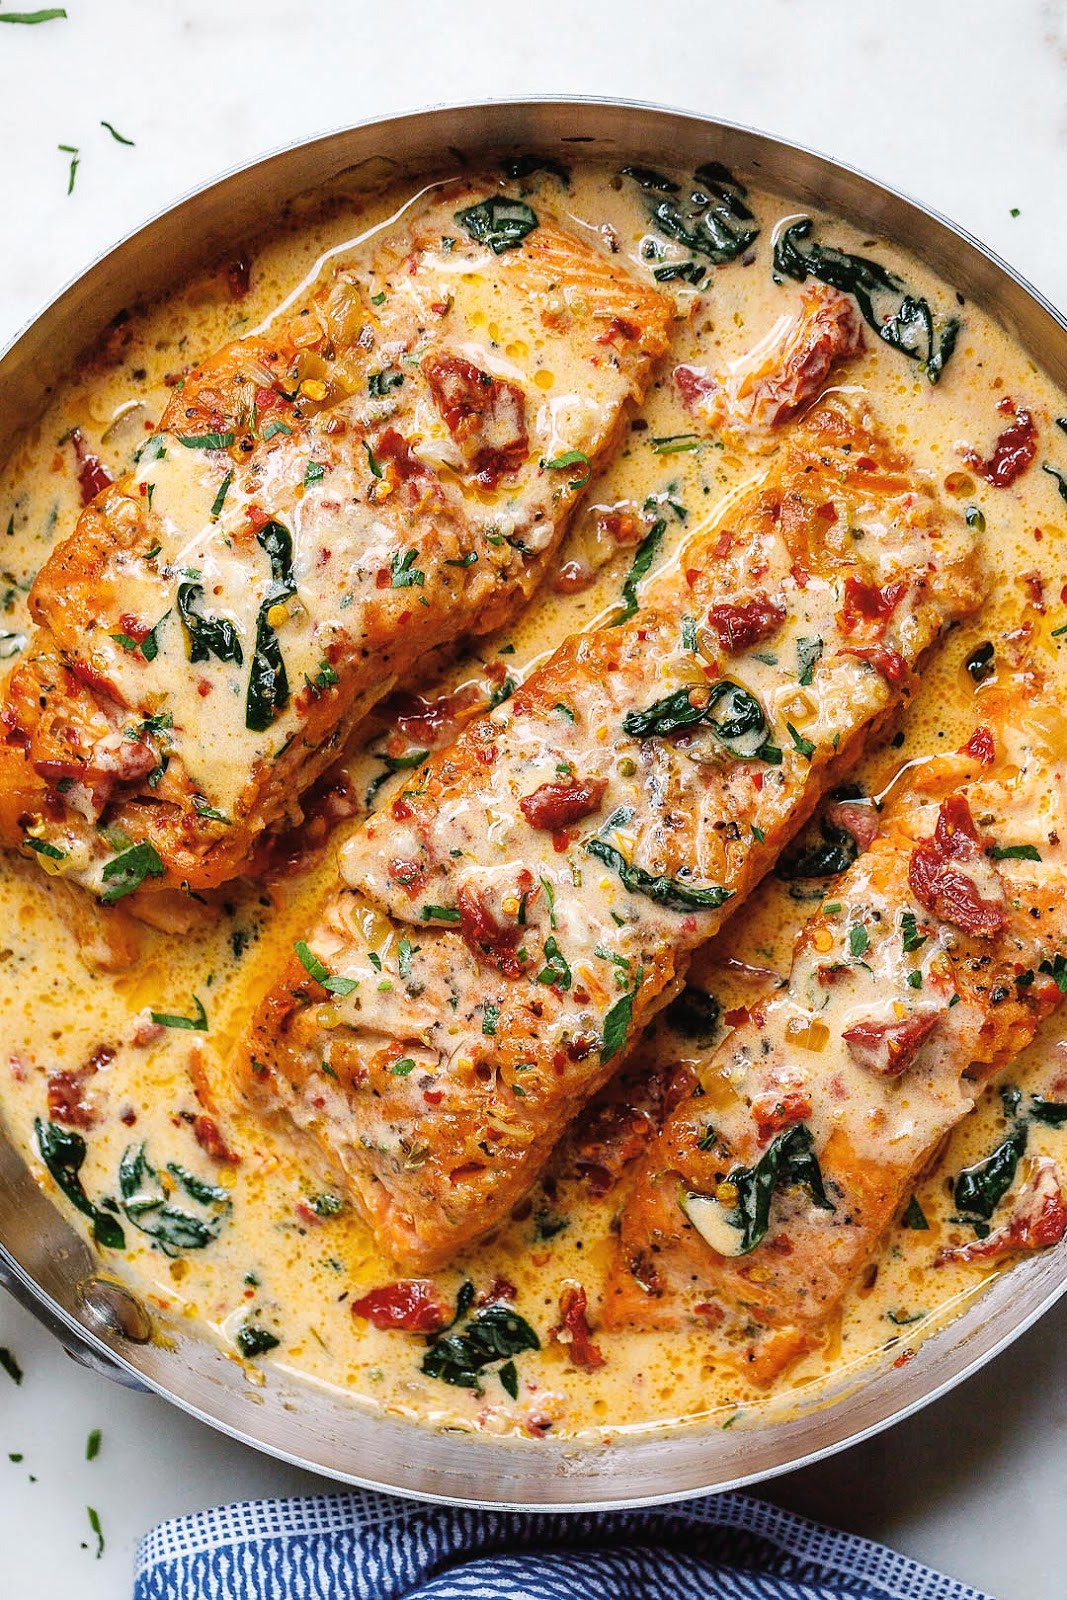 How to Make Creamy Garlic Tuscan Salmon With Spinach and Sun-Dried Tomatoes